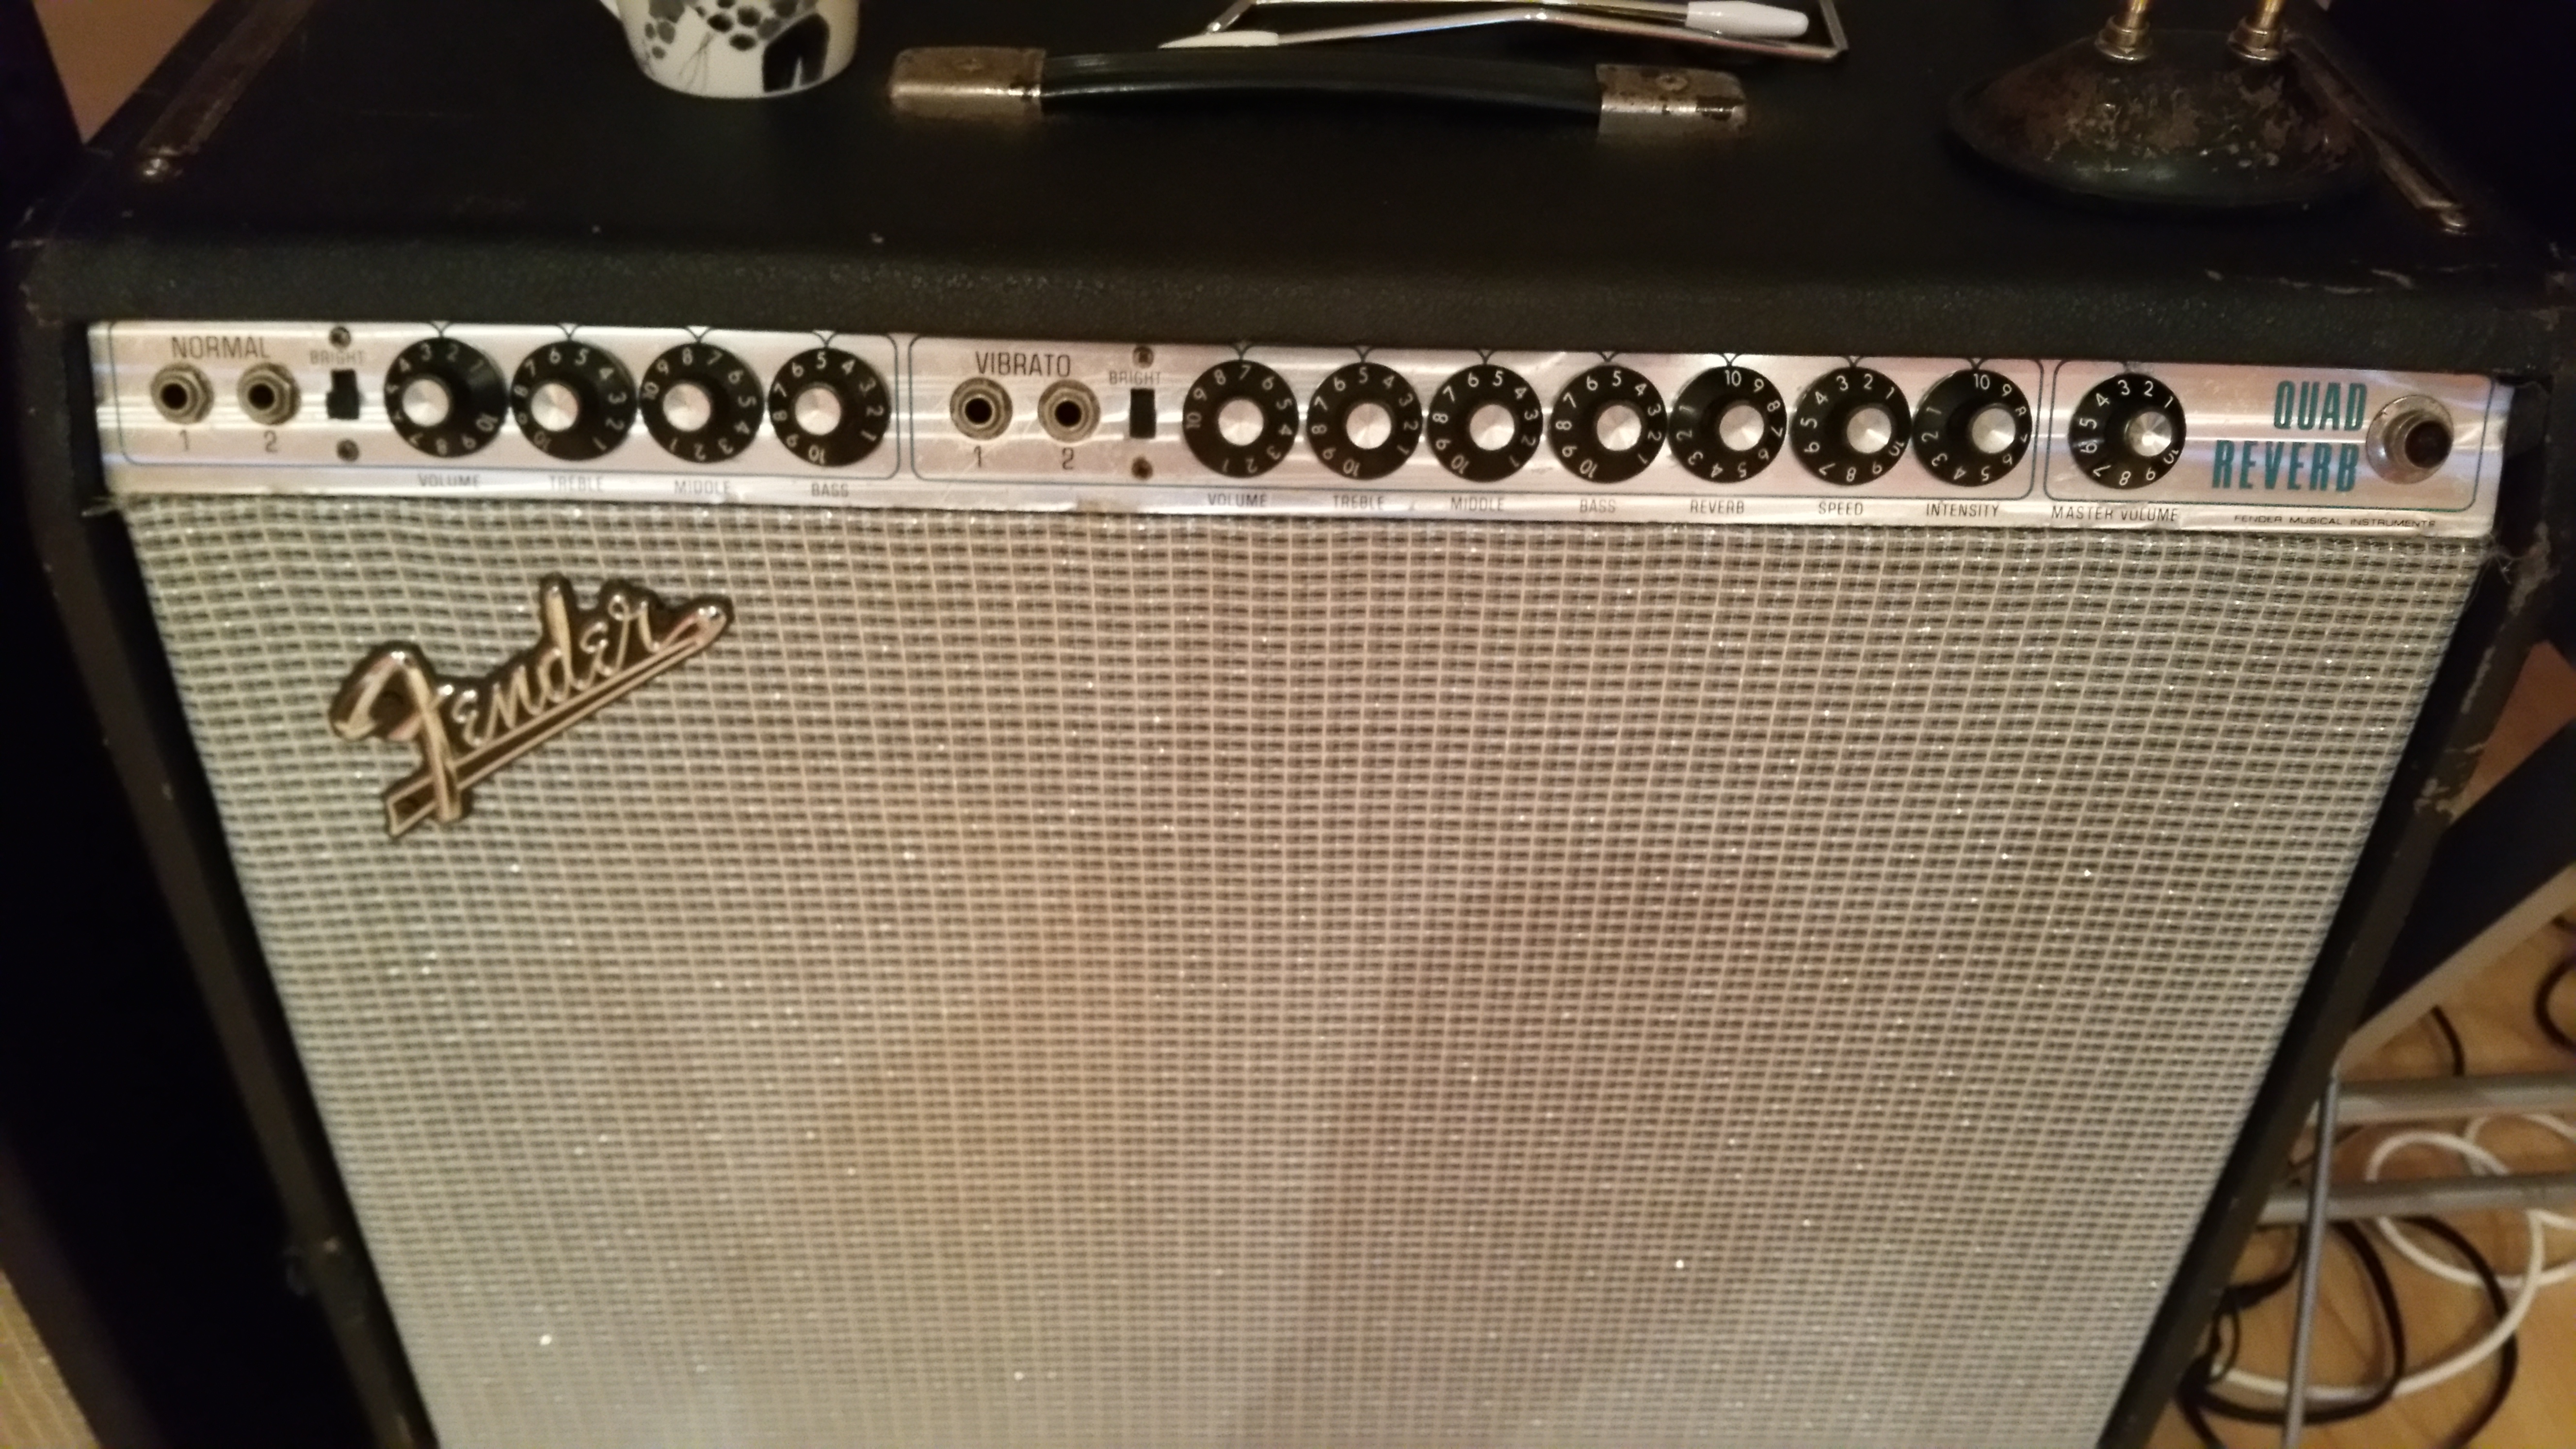 ...which came with a one-year review period. fender quad reverb There'...